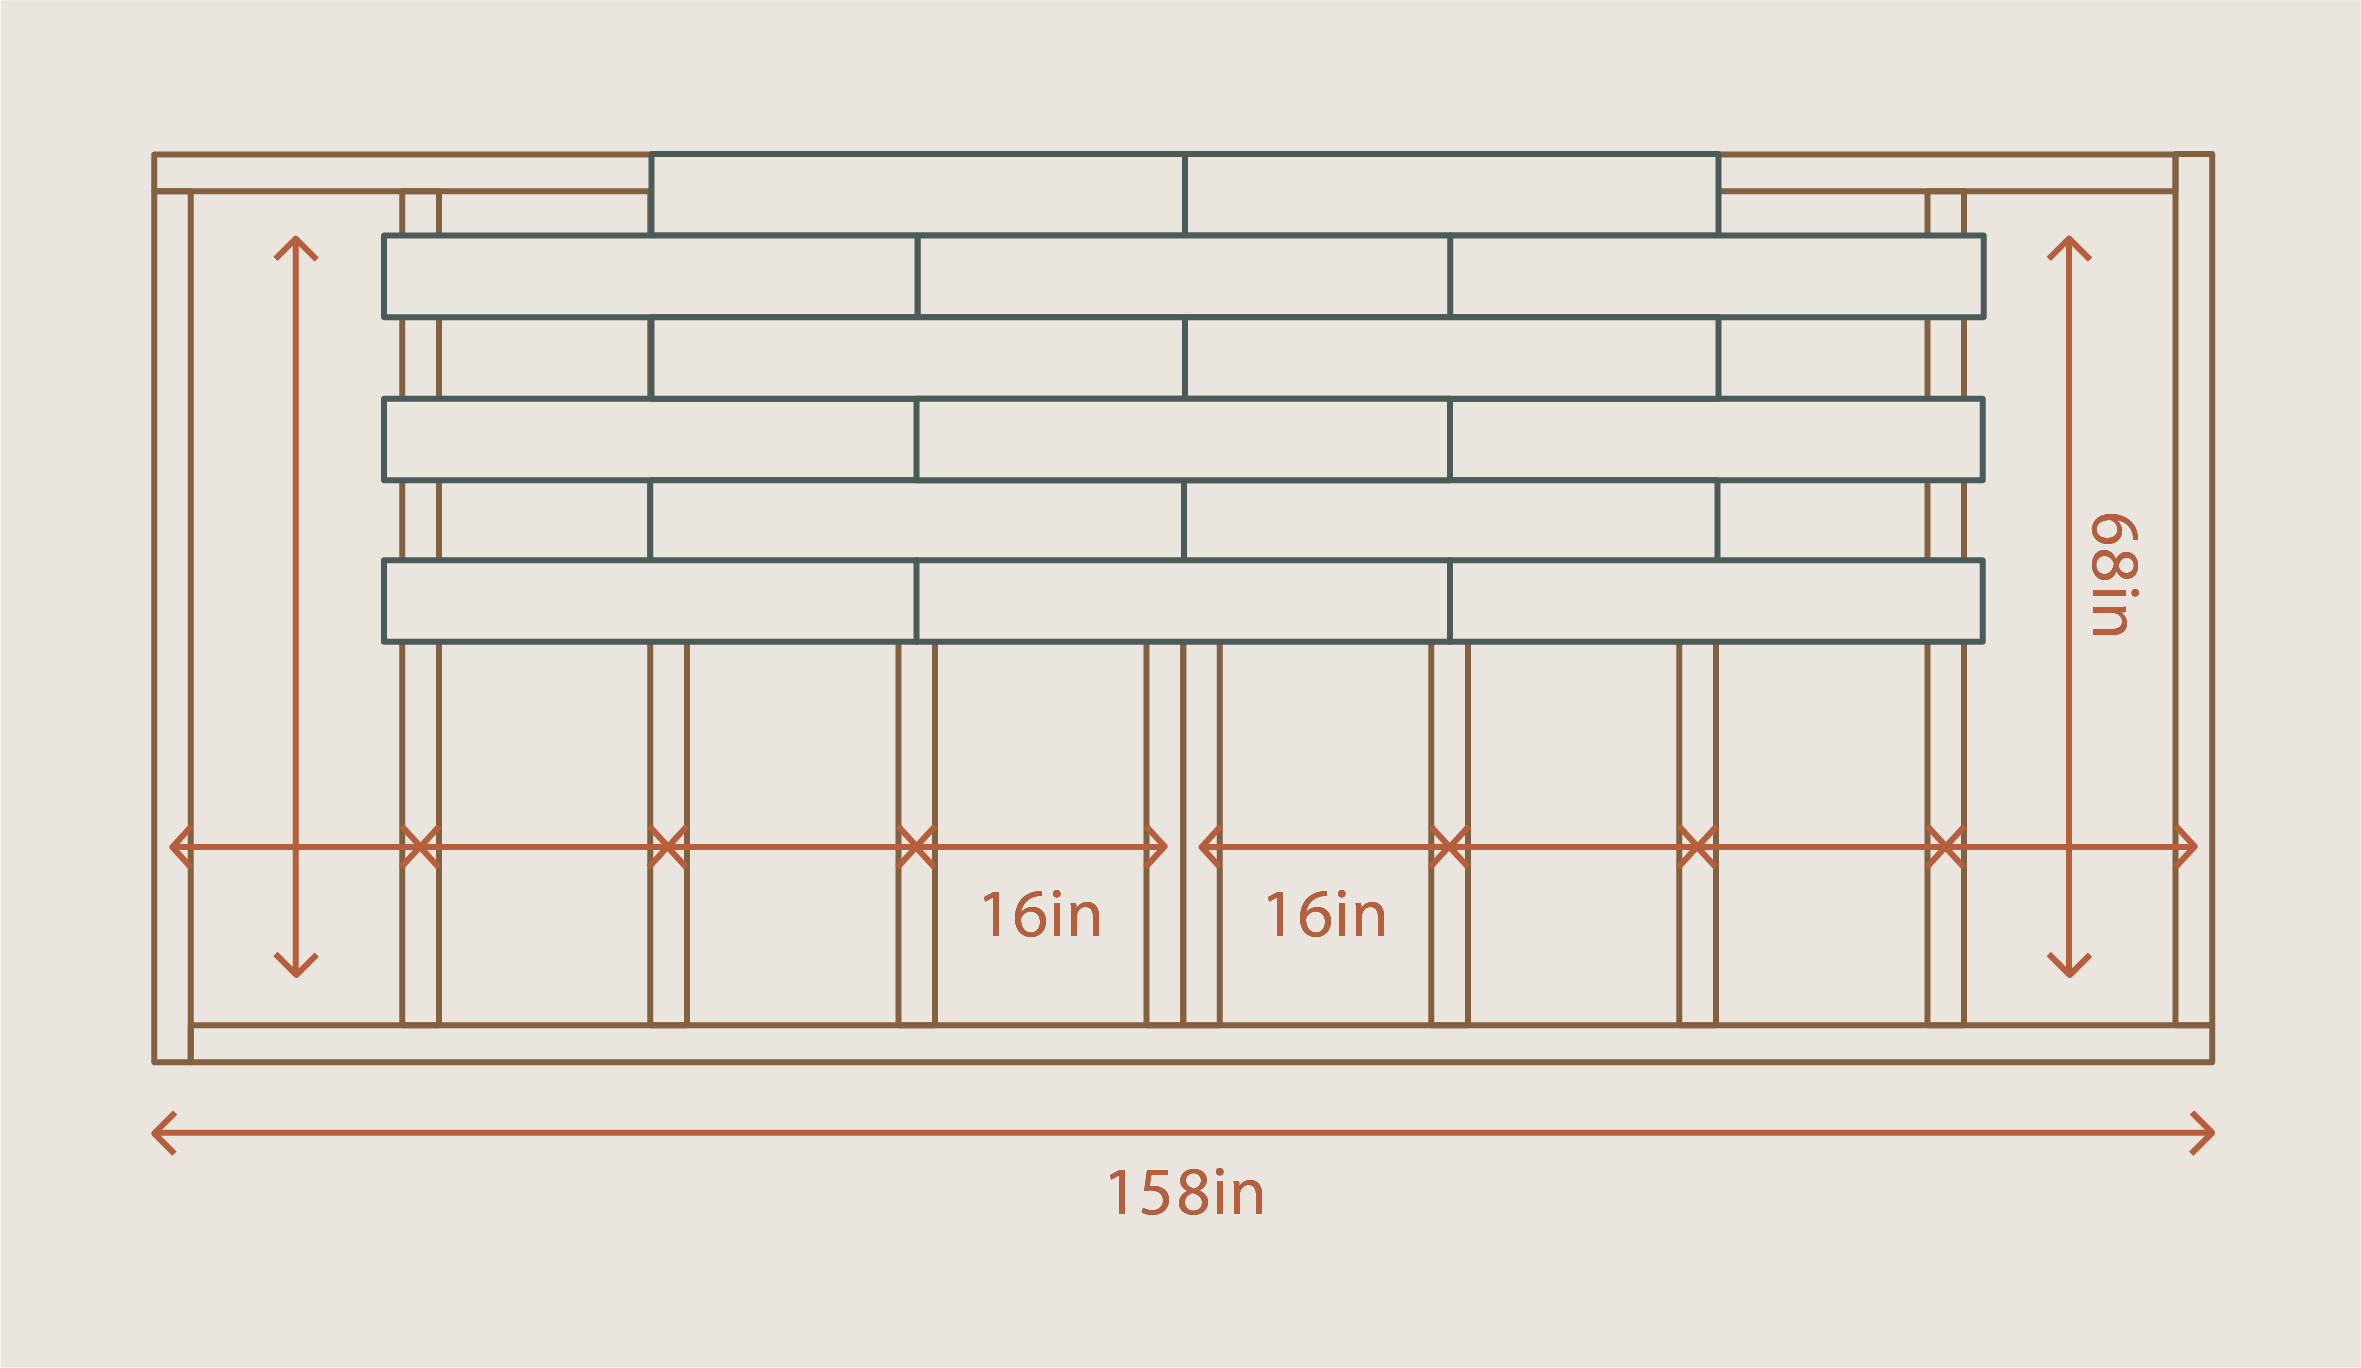 An illustrated deck plan shows substructure joists with some decking on top and deck measurements. 